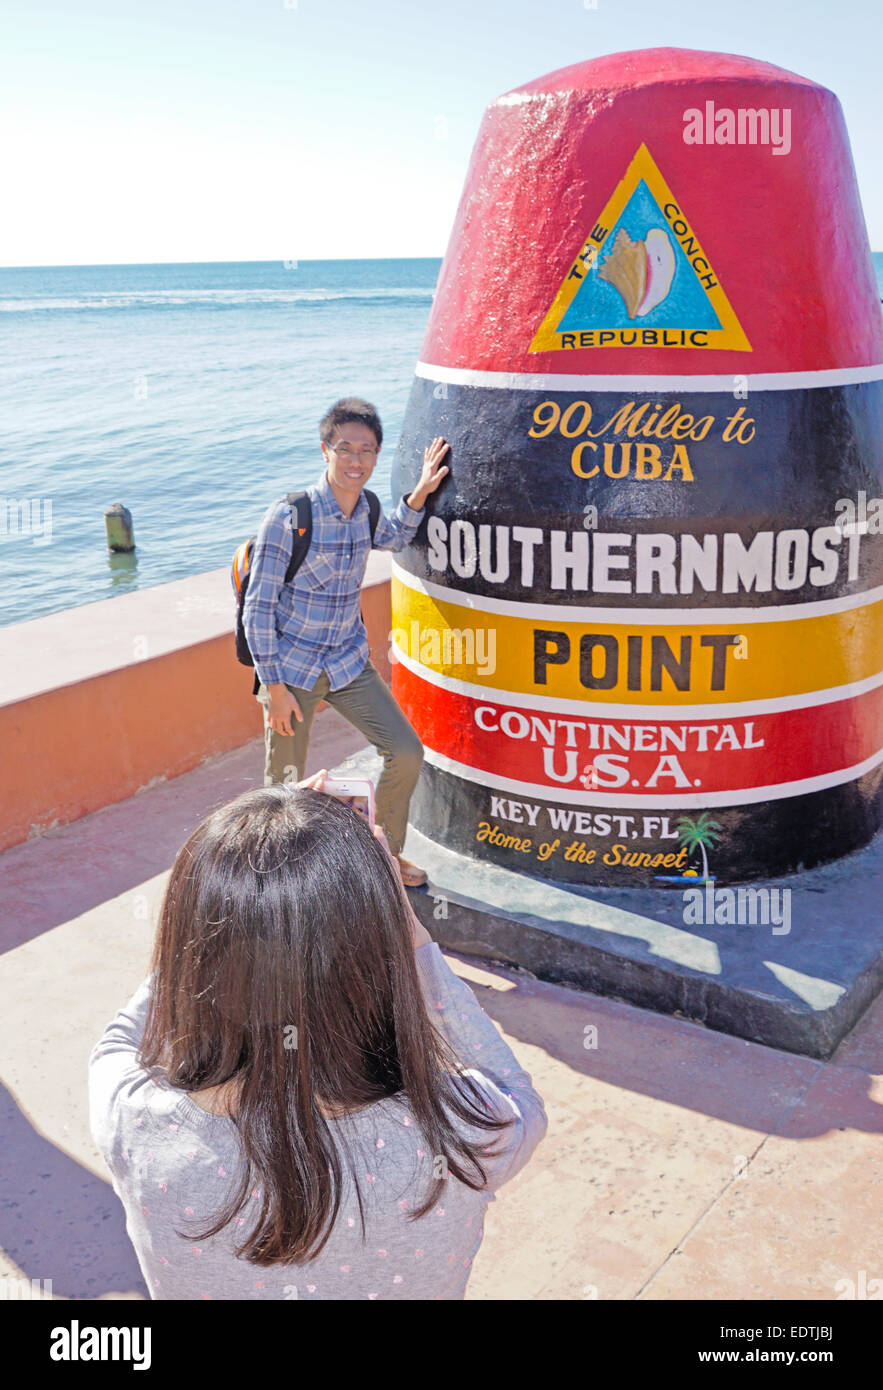 Southernmost point in continental U.S.A. marker is popular photo opportunity for foreign tourists in Key West. Stock Photo